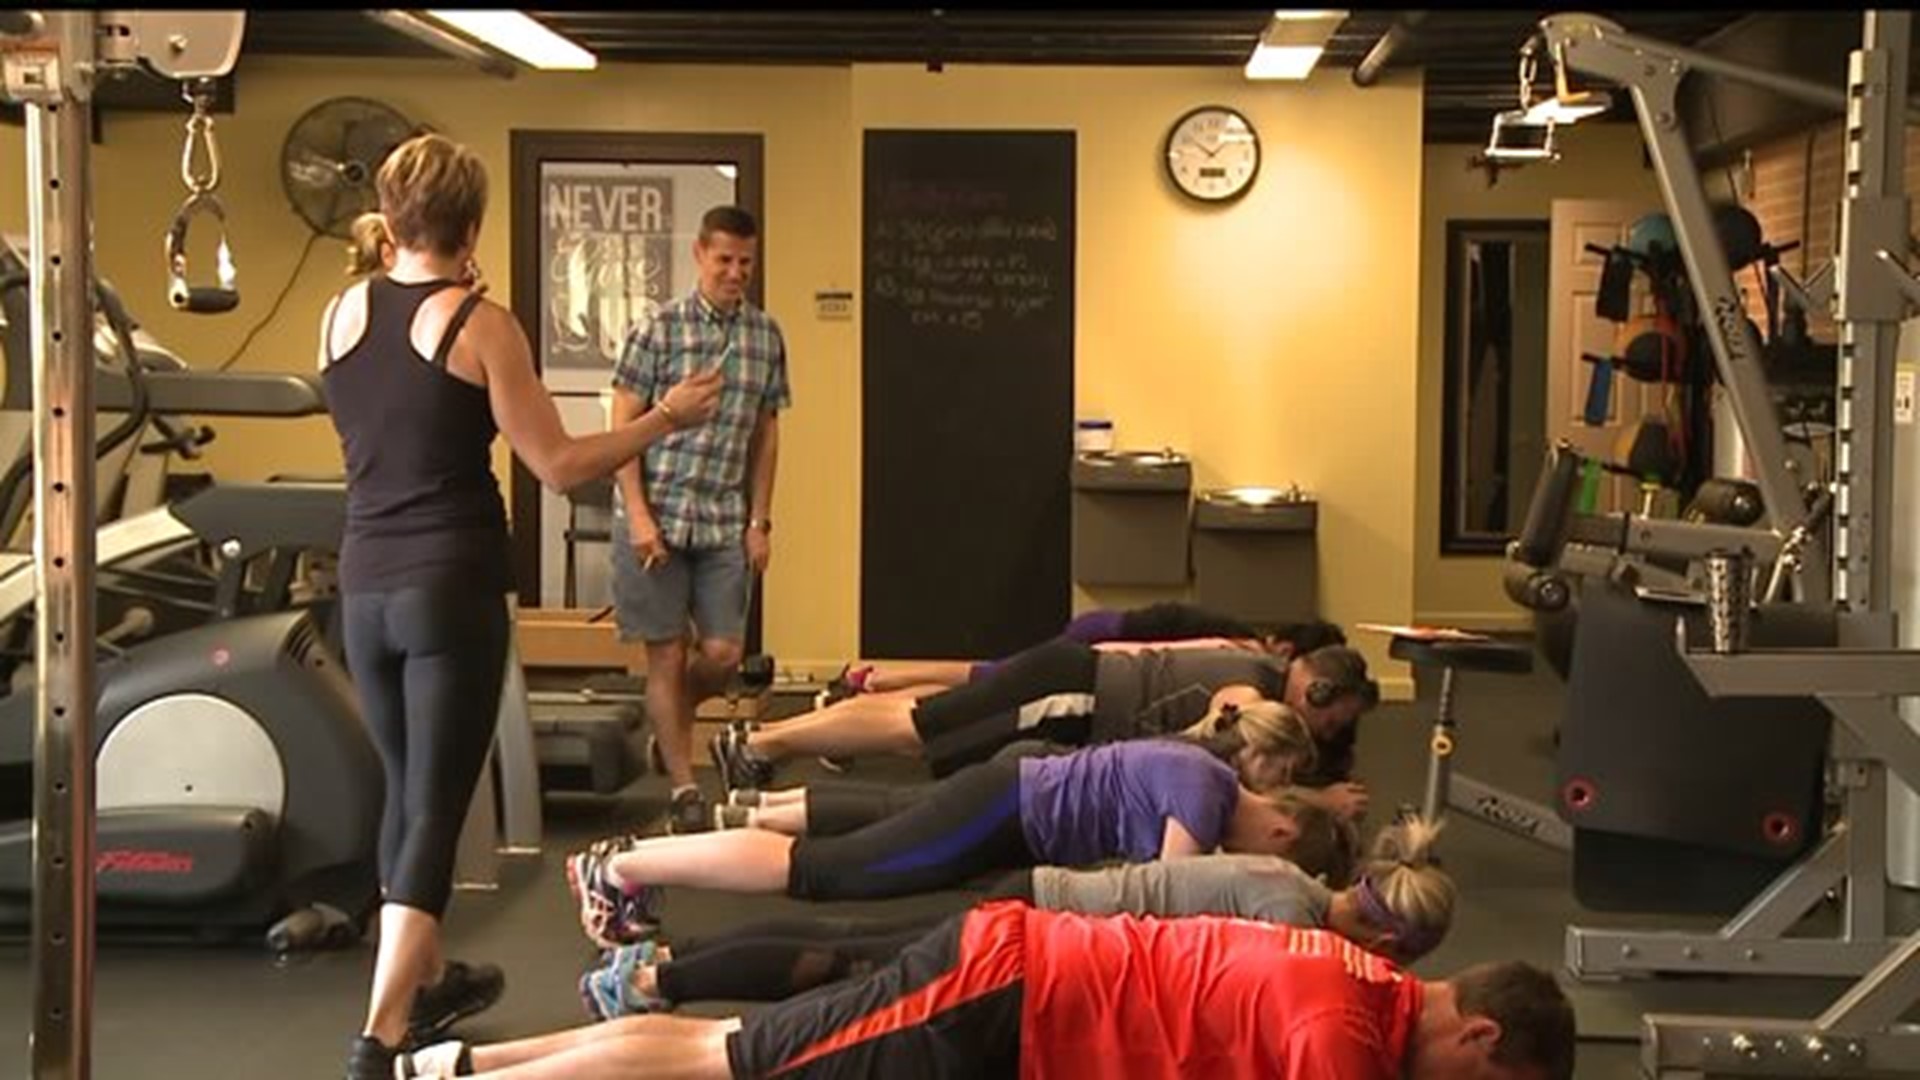 Be Well: Plank Challenge Winners Revealed